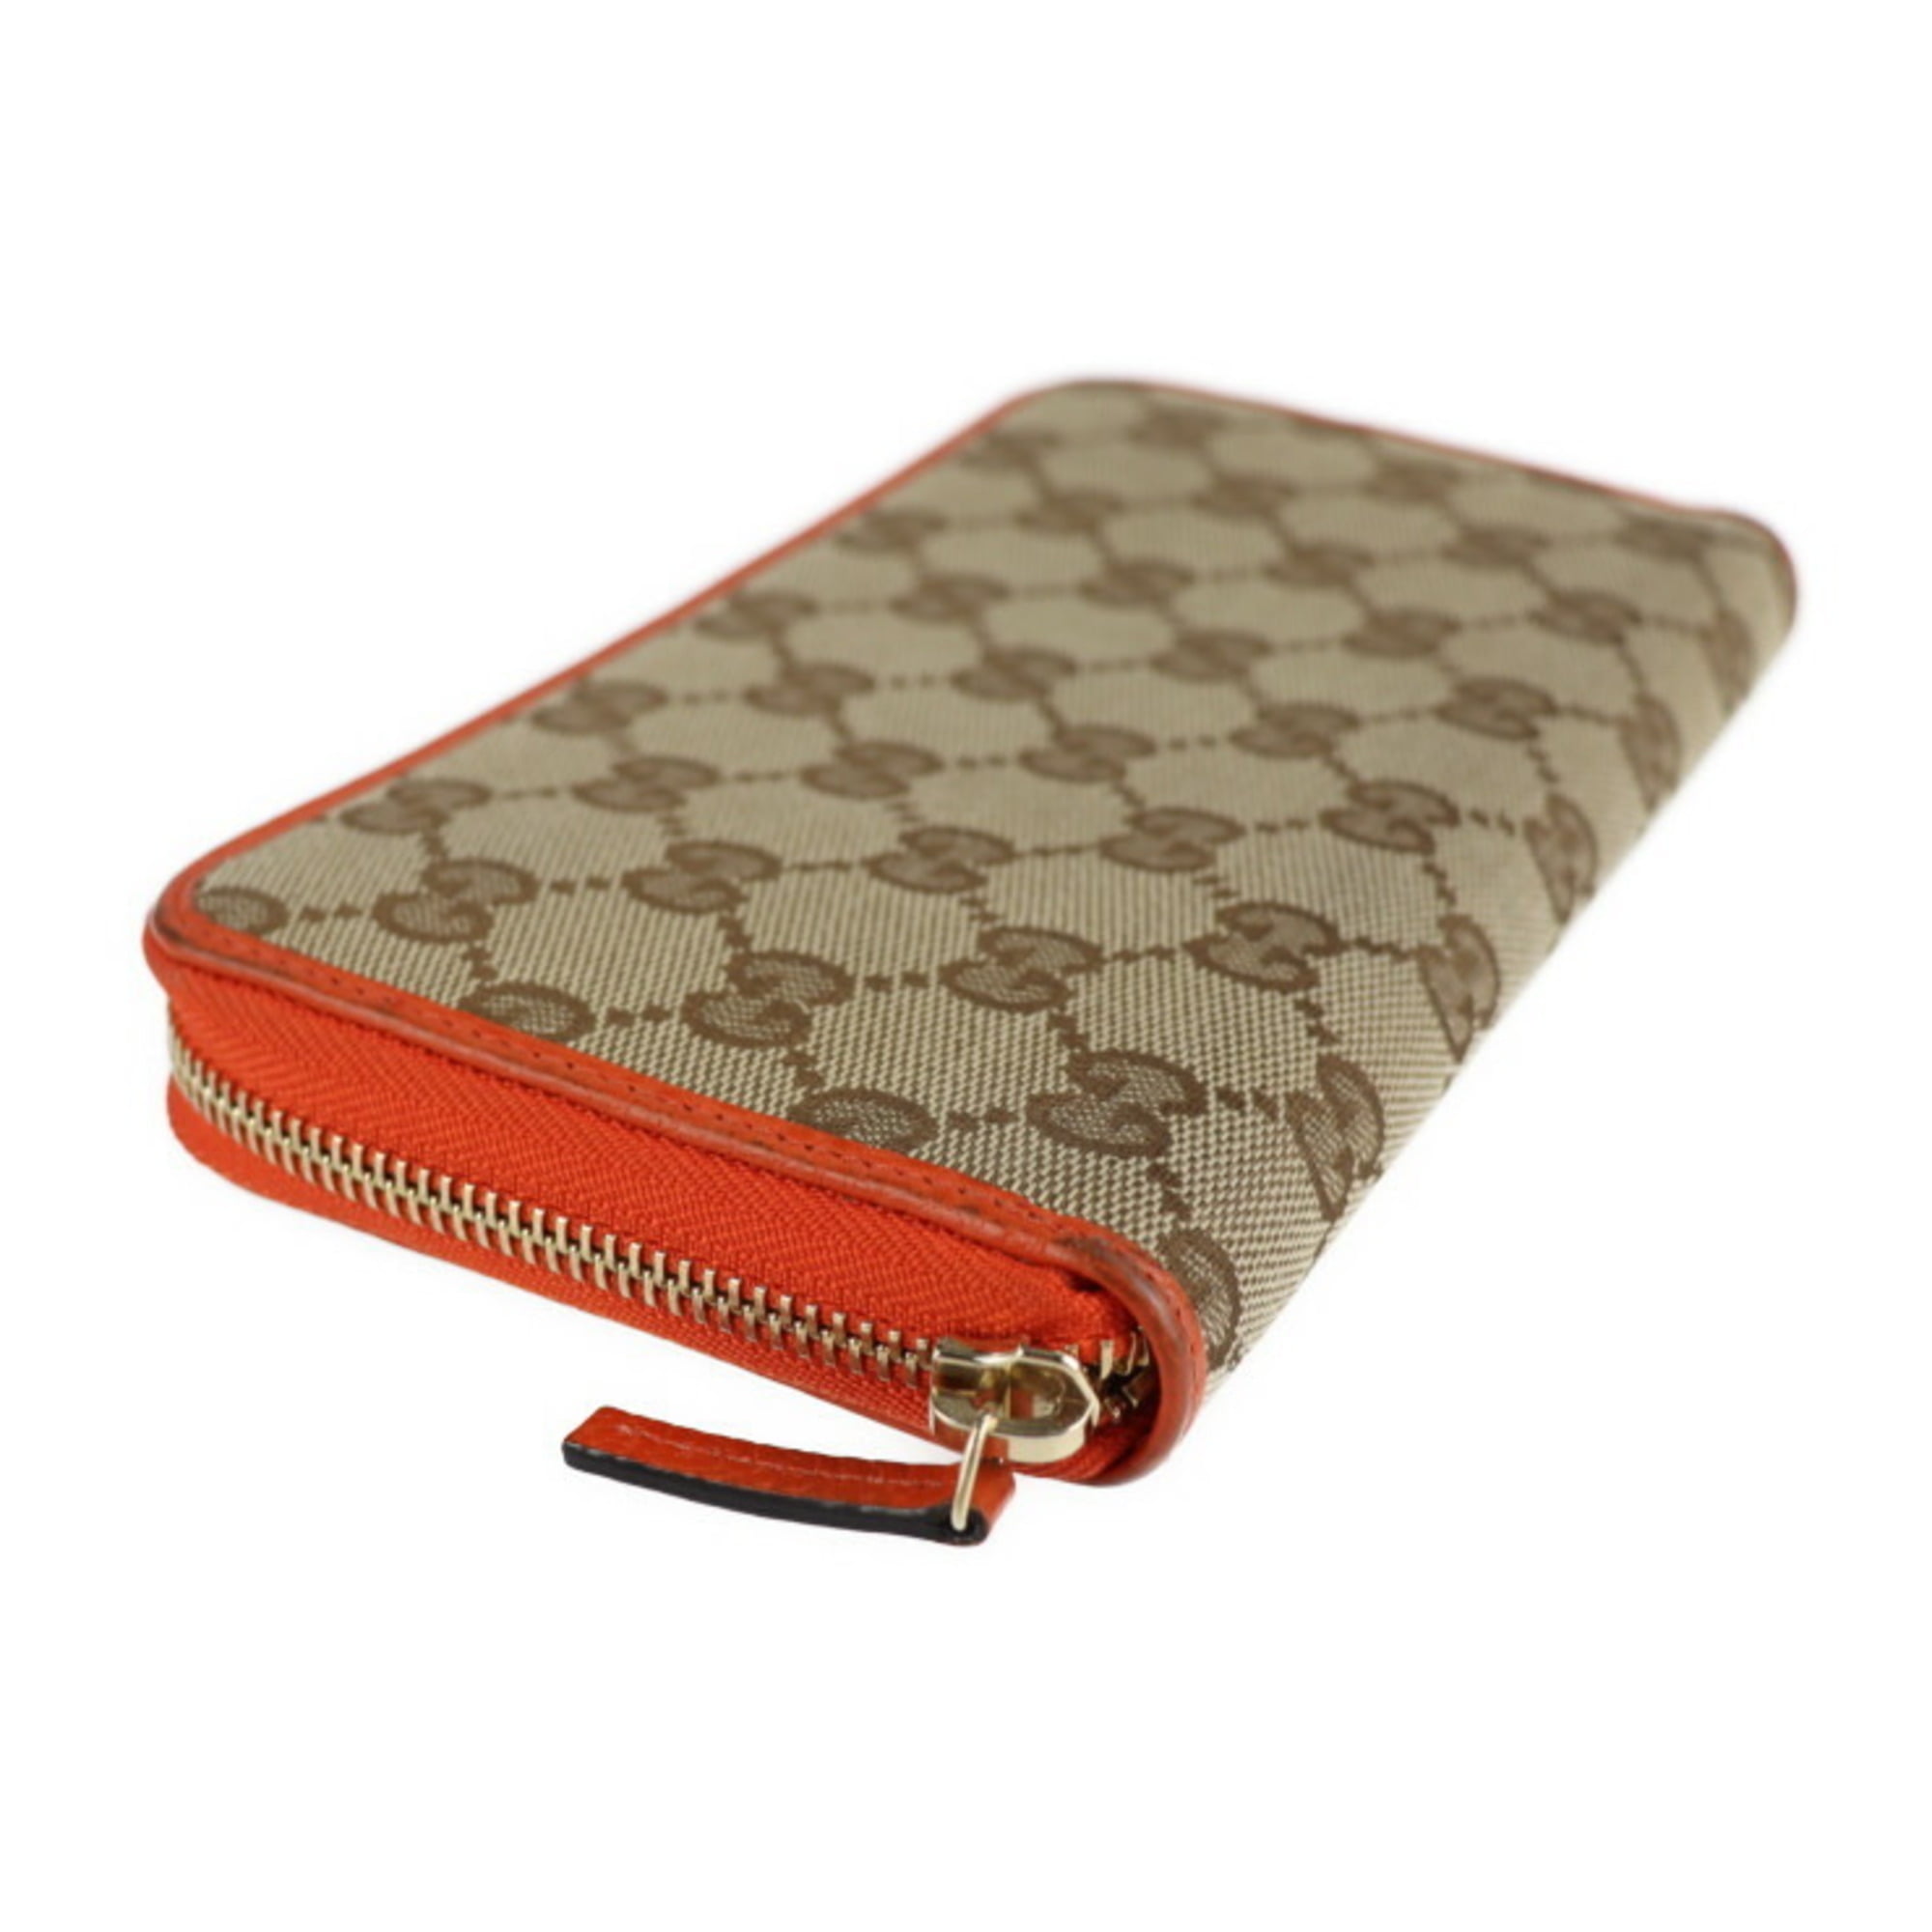 Buy Gucci Women's Beige GG Canvas & Pink Leatehr Long Wallet 363423 Ky9lg  Zip Around at